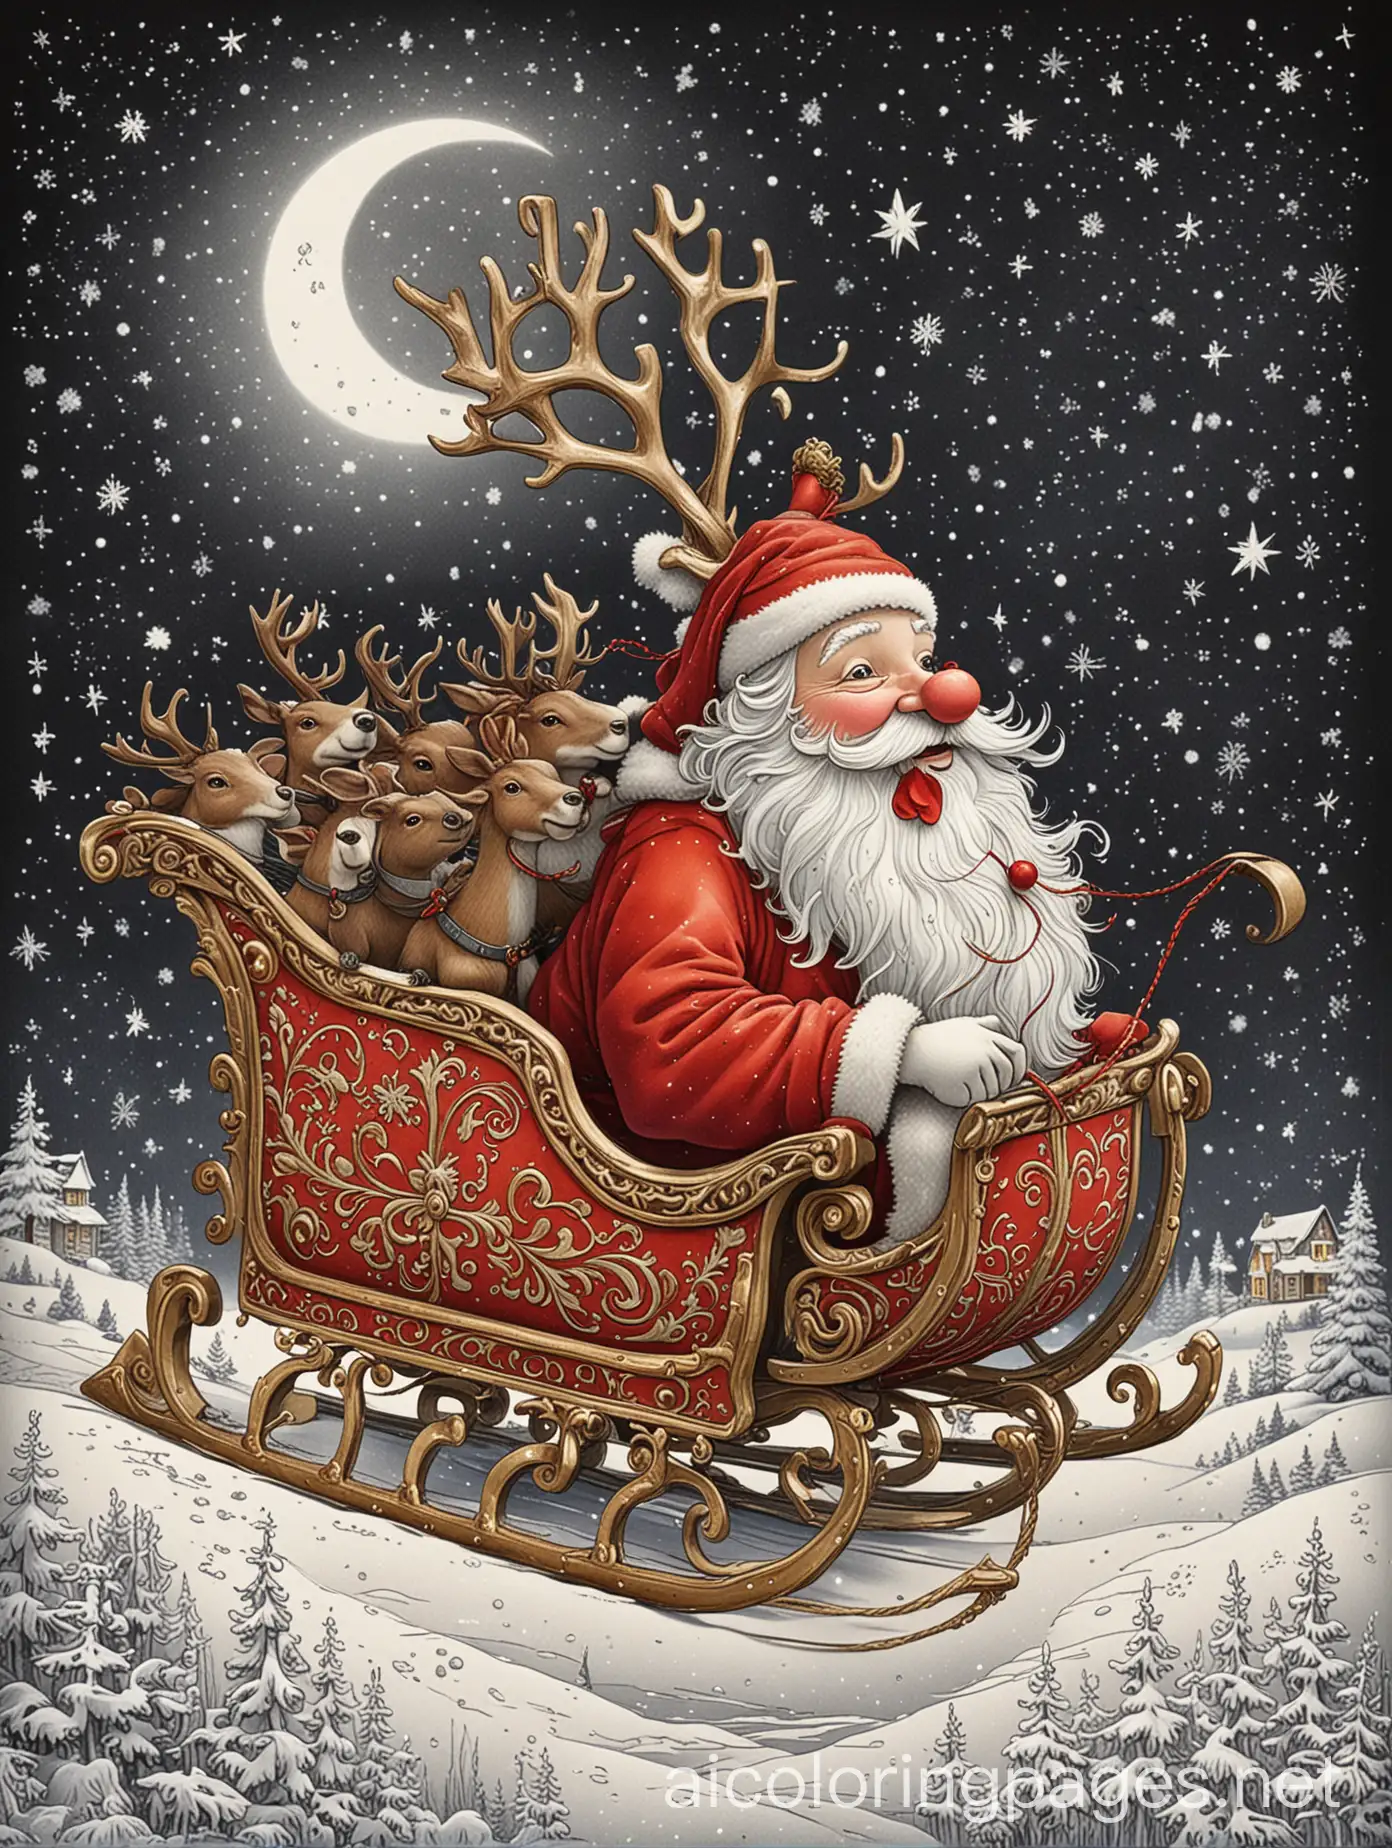 A robust, jolly Santa, sitting in his sleigh, pulled by eight tiny reindeer, on a starry snowy night, the moonlight glinting off of Santa's face. Create a coloring book image of Santa Claus in a traditional sleigh being pulled by eight tiny reindeer. Santa's sleigh should be ornate with festive decorations. The reindeer should be small, cute, and lively, each with a red harness. The scene should be whimsical and kid-friendly, with a clear, simple background suitable for coloring. Child's coloring book, distinct thick lines so a toddler can color it, child's coloring page, black and white, ample white space, highly detailed, intricate, elaborate, thick outlines to make it easy to color, Coloring Page, black and white, line art, white background, Simplicity, Ample White Space. The background of the coloring page is plain white to make it easy for young children to color within the lines. The outlines of all the subjects are easy to distinguish, making it simple for kids to color without too much difficulty, Coloring Page, black and white, line art, white background, Simplicity, Ample White Space. The background of the coloring page is plain white to make it easy for young children to color within the lines. The outlines of all the subjects are easy to distinguish, making it simple for kids to color without too much difficulty